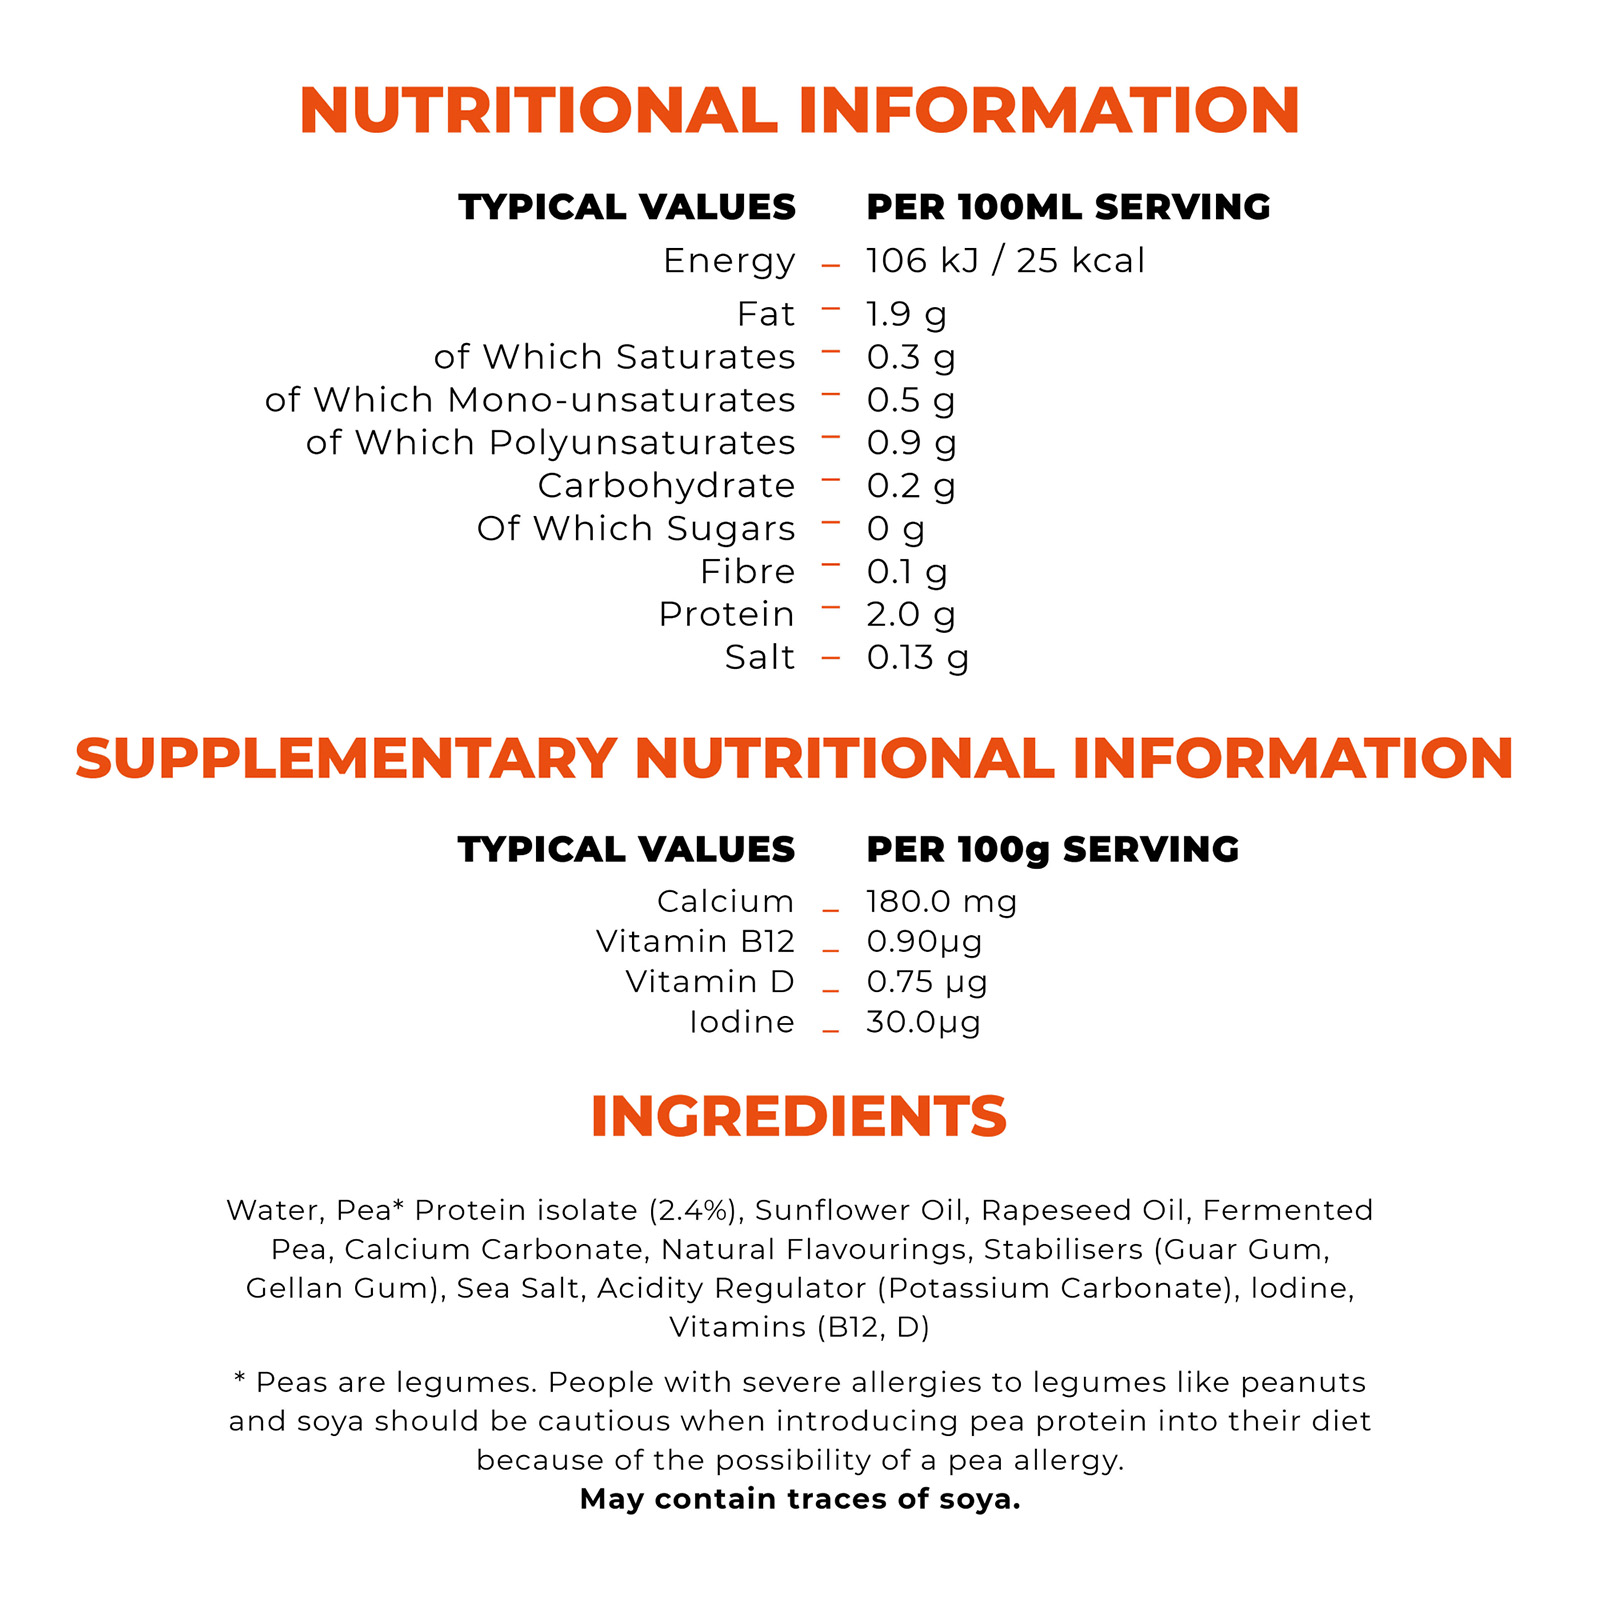 NUTRITIONAL INFORMATION
                                  PER 100ML SERVING
                                  106 kJ/25 kcal
                                  TYPICAL VALUES
                                  Energy
                                  Fat
                                  1.9 g
                                  of Which Saturates - 0.3 g
                                  0.5 g
                                  0.9 g
                                  0.2 g
                                  Og
                                  0.1 g
                                  2.0 g
                                  0.13 g
                                  of Which Mono-unsaturates
                                  of Which Polyunsaturates
                                  Carbohydrate
                                  Of Which Sugars
                                  Fibre
                                  Protein
                                  Salt
                                  -
                                  -
                                  SUPPLEMENTARY NUTRITIONAL INFORMATION
                                  TYPICAL VALUES
                                  Calcium
                                  PER 100g SERVING
                                  180.0 mg
                                  Vitamin B12
                                  0.90μg
                                  Vitamin D - 0.75 μg
                                  lodine
                                  30.0μg
                                  INGREDIENTS
                                  Water, Pea* Protein isolate (2.4%), Sunflower Oil, Rapeseed Oil, Fermented
                                  Pea, Calcium Carbonate, Natural Flavourings, Stabilisers (Guar Gum,
                                  Gellan Gum), Sea Salt, Acidity Regulator (Potassium Carbonate), lodine,
                                  Vitamins (B12, D)
                                  Peas are legumes. People with severe allergies to legumes like peanuts
                                  and soya should be cautious when introducing pea protein into their diet
                                  because of the possibility of a pea allergy.
                                  May contain traces of soya.
                                  